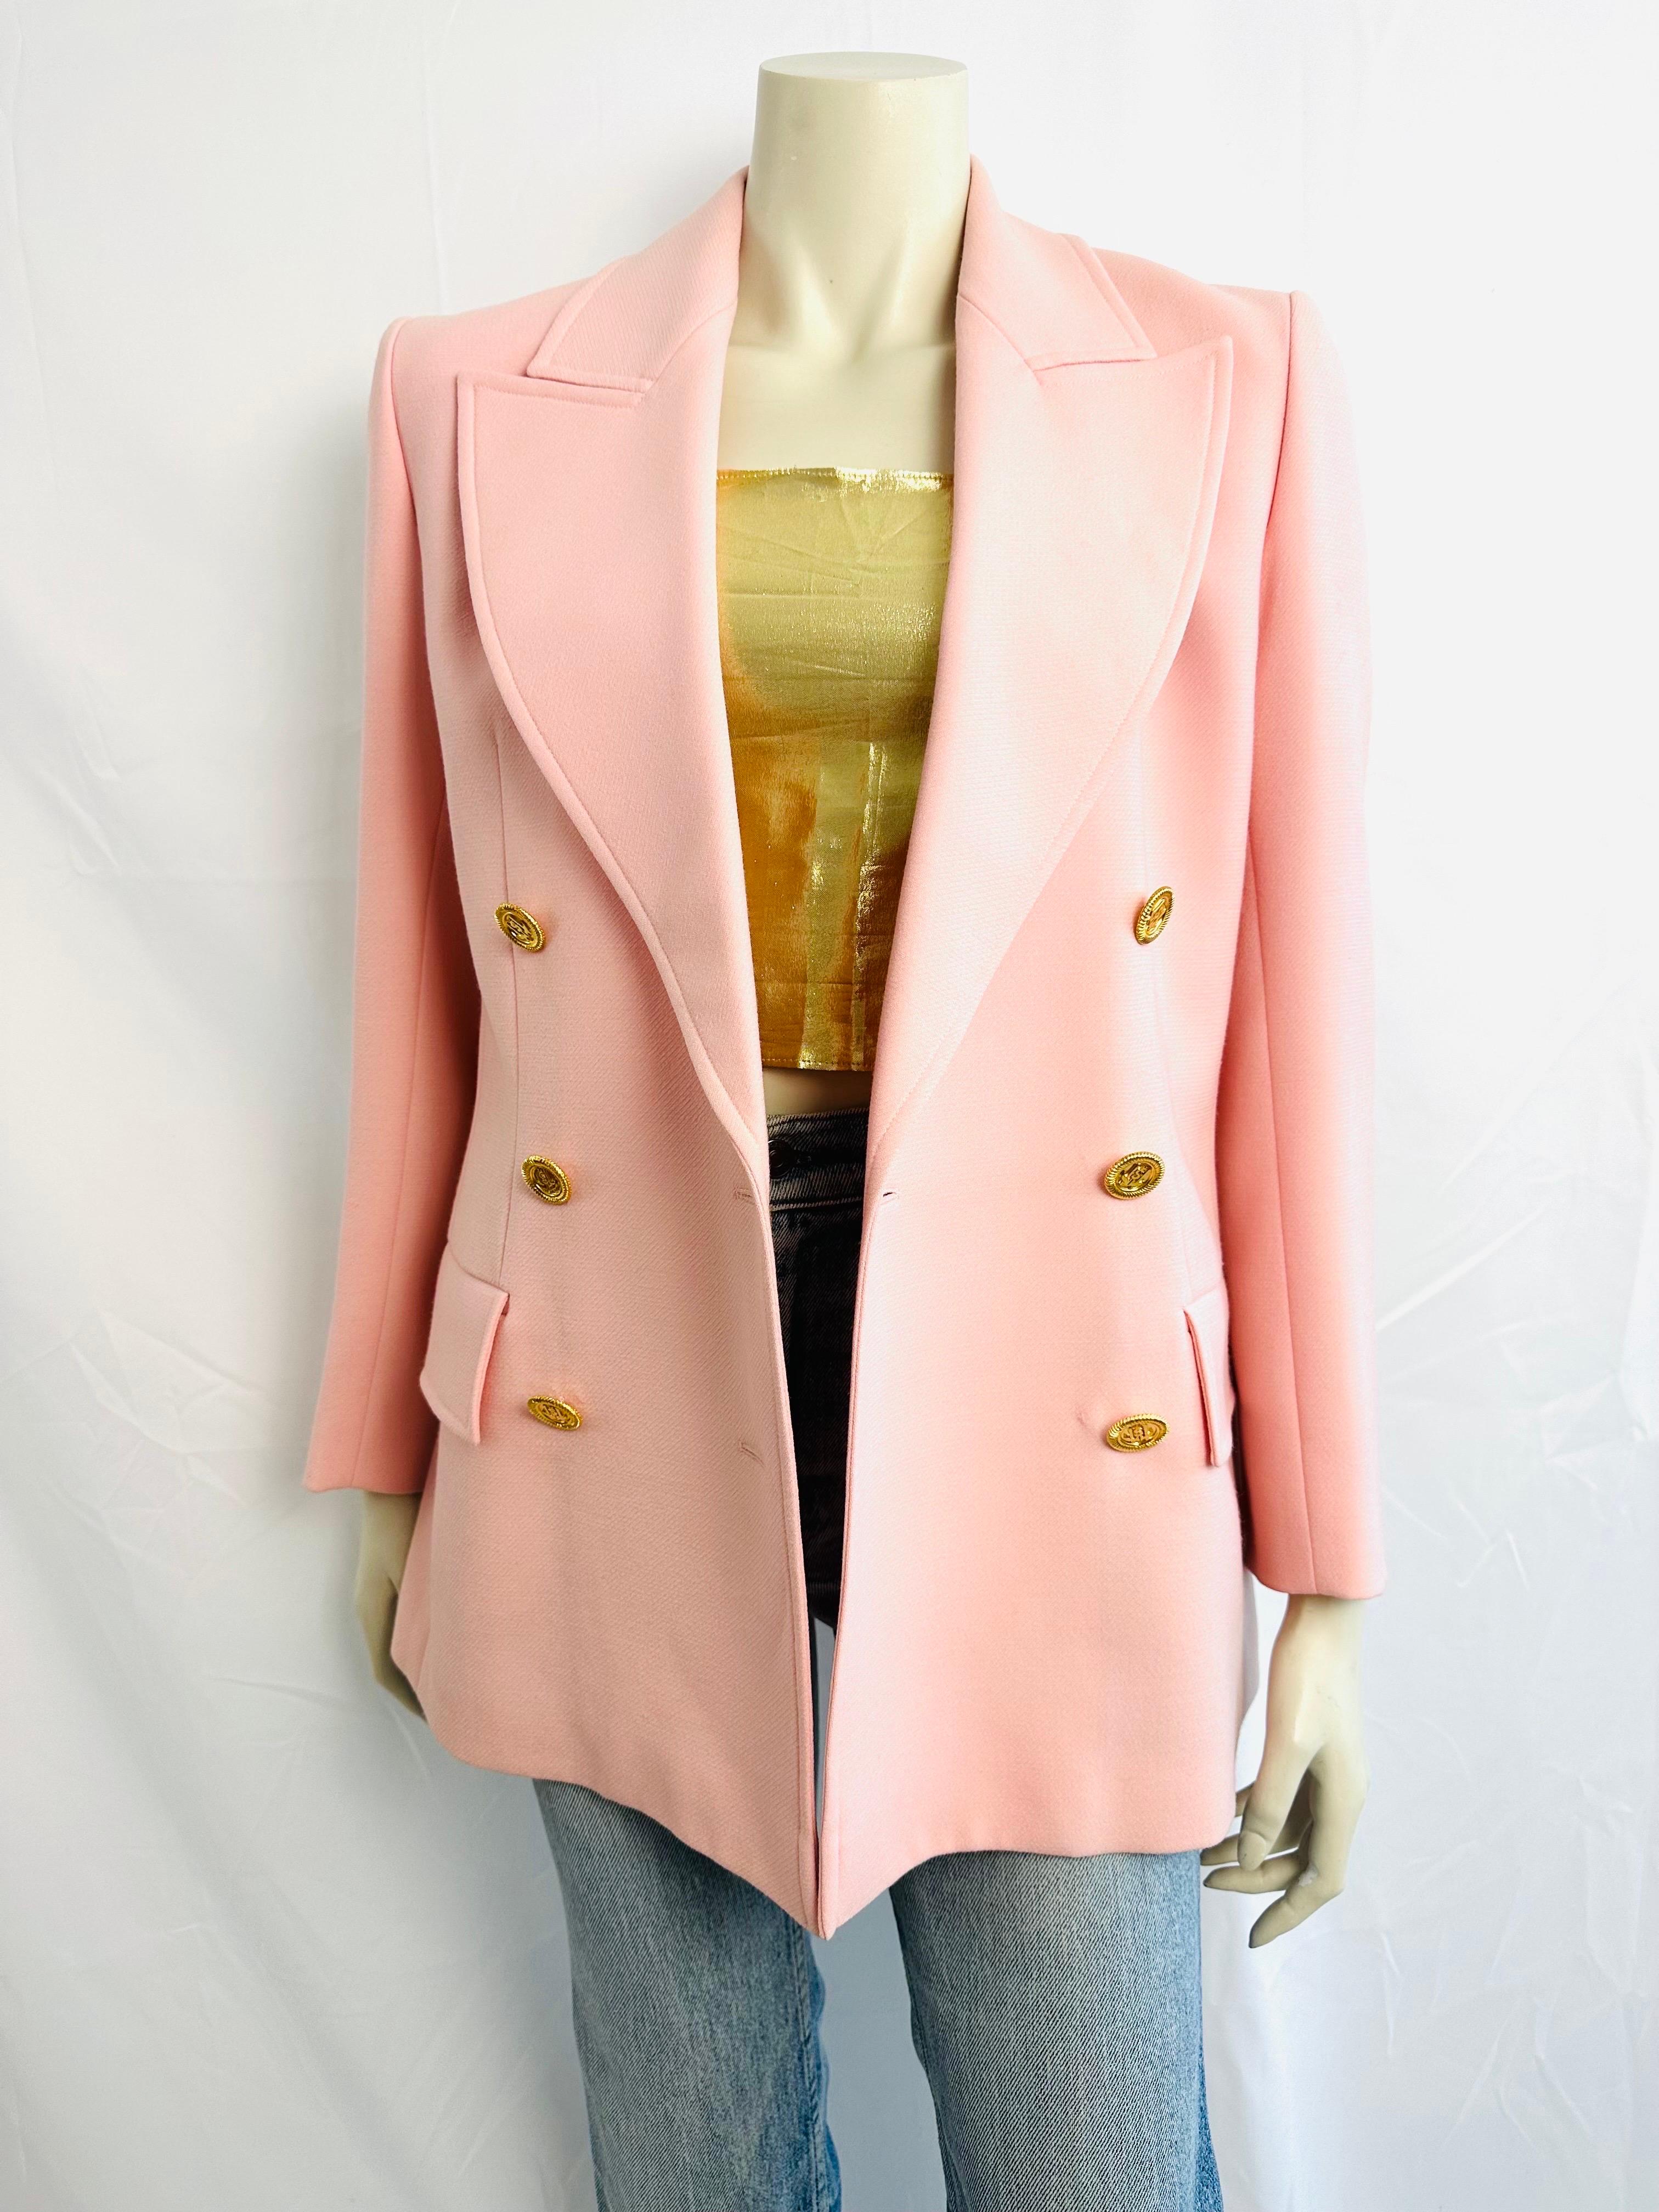 Superb pink wool blazer by Jean Louis
Scherrer from the 1980s
Straight cut, tailored collar, double-breasted buttoning.
Attractive gold metal buttons
2 large flap pockets
Size 38, loose fit, please refer to measurements
Shoulder length 42cm
Chest